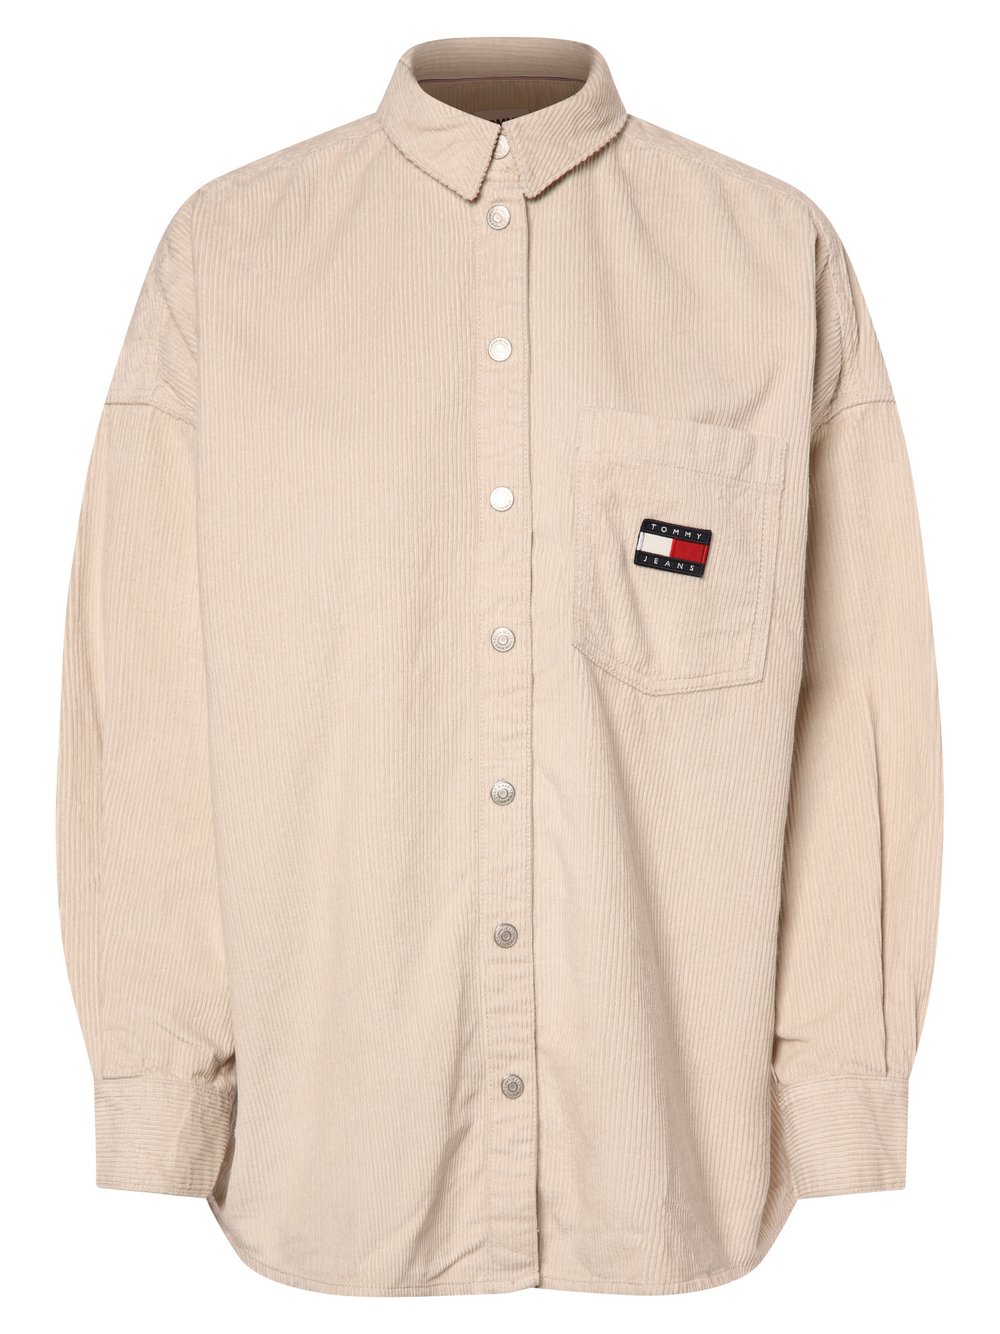 Tommy Jeans - Damski overshirt, beżowy